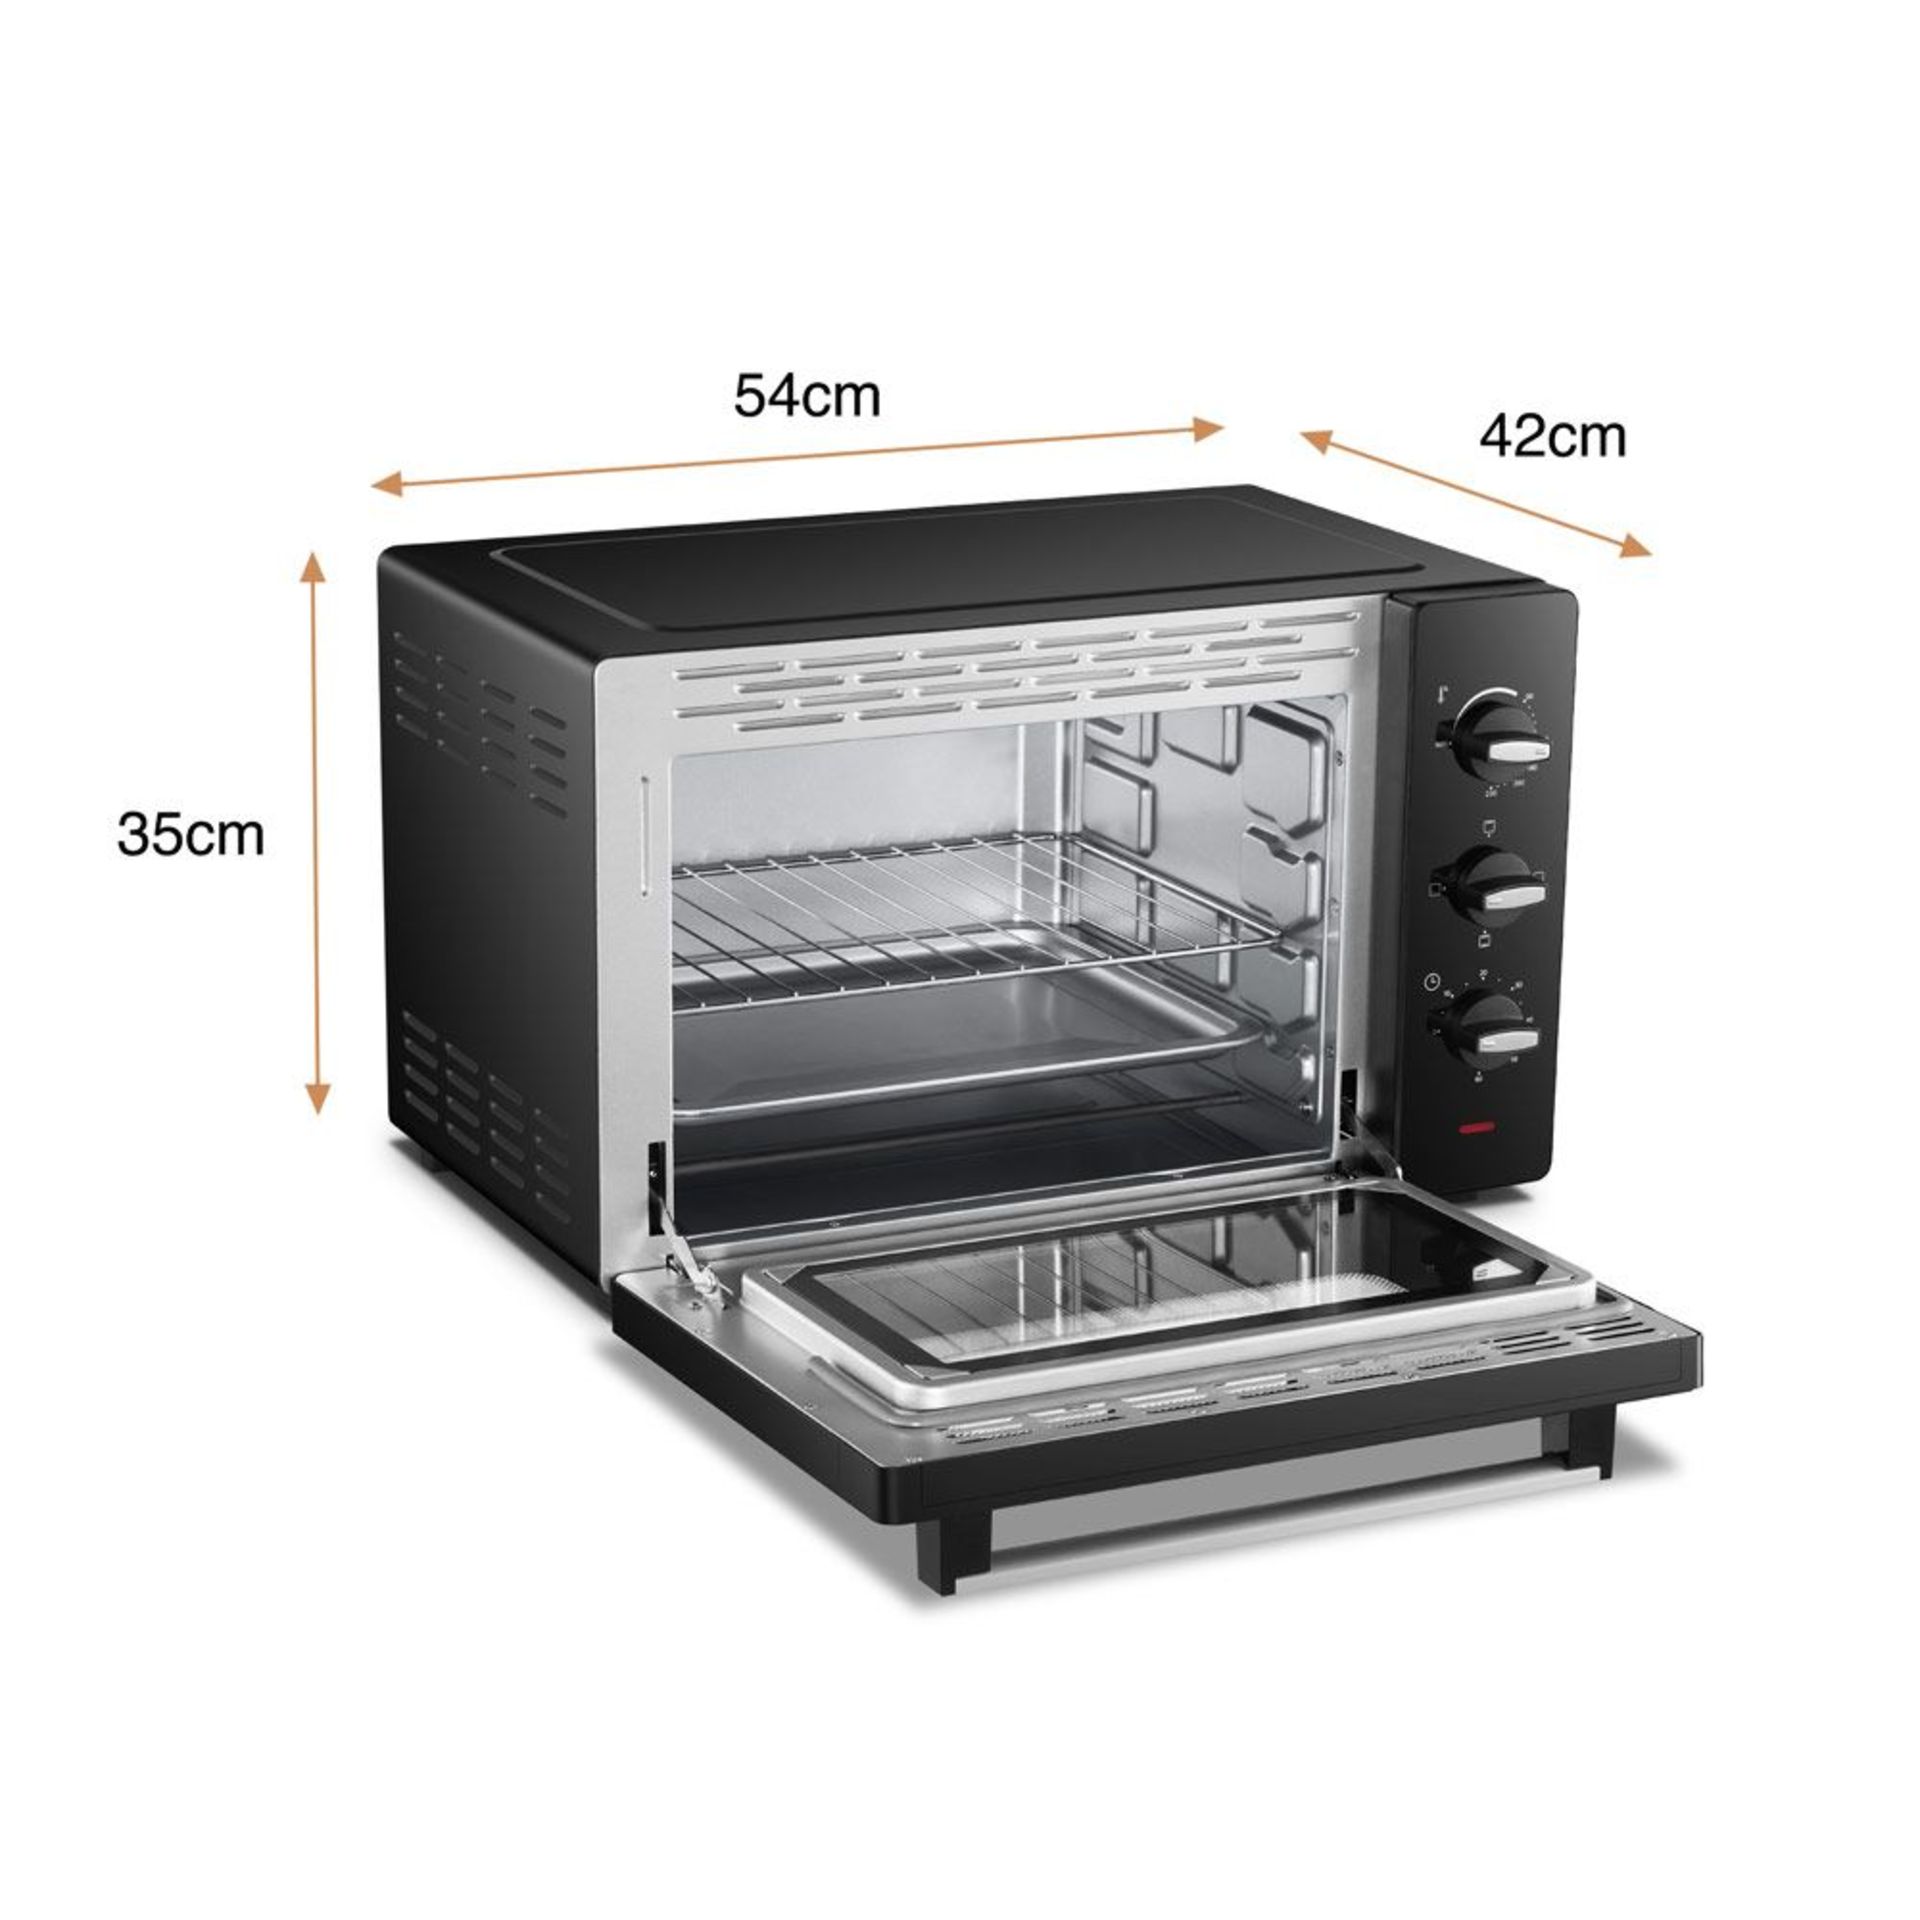 38L Mini Oven. Our 38L Mini Oven, makes for the perfect addition to any kitchen, its small size